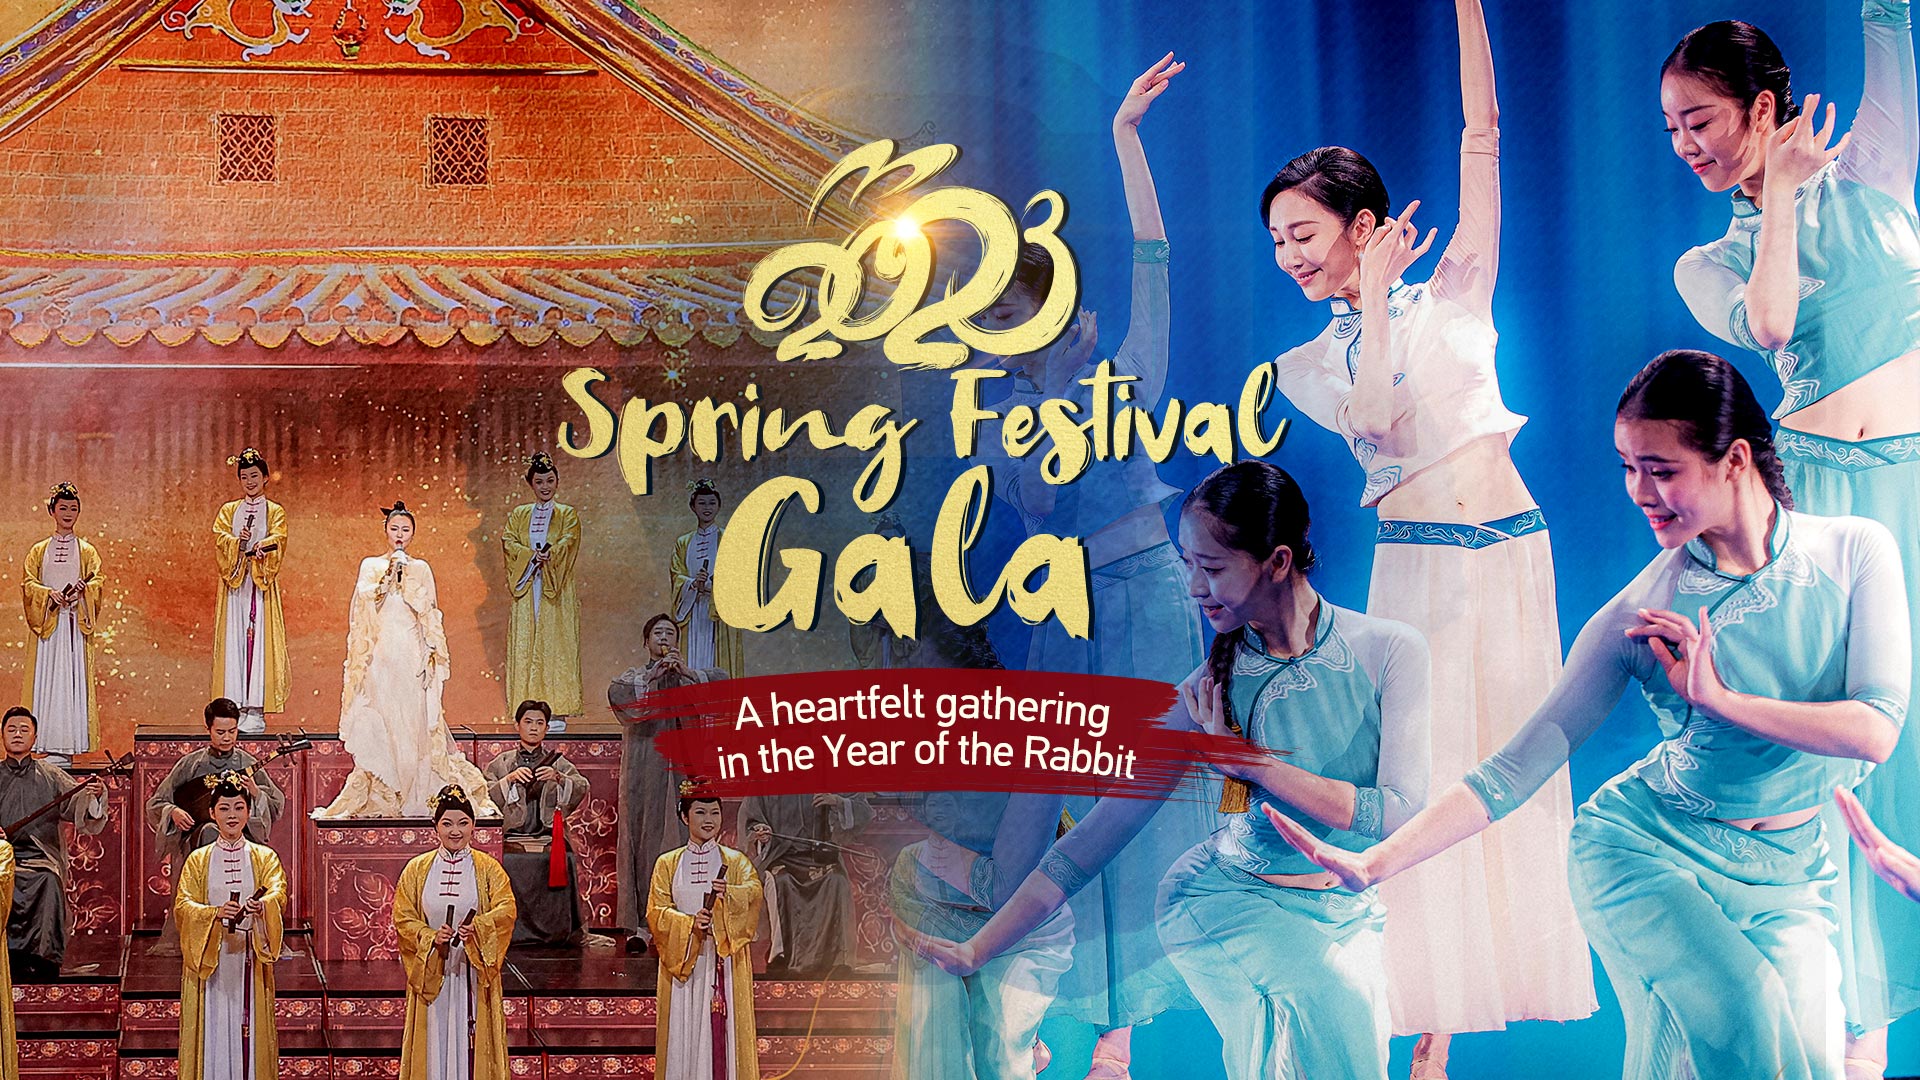 2023 Spring Festival Gala: A heartfelt gathering in the Year of the Rabbit